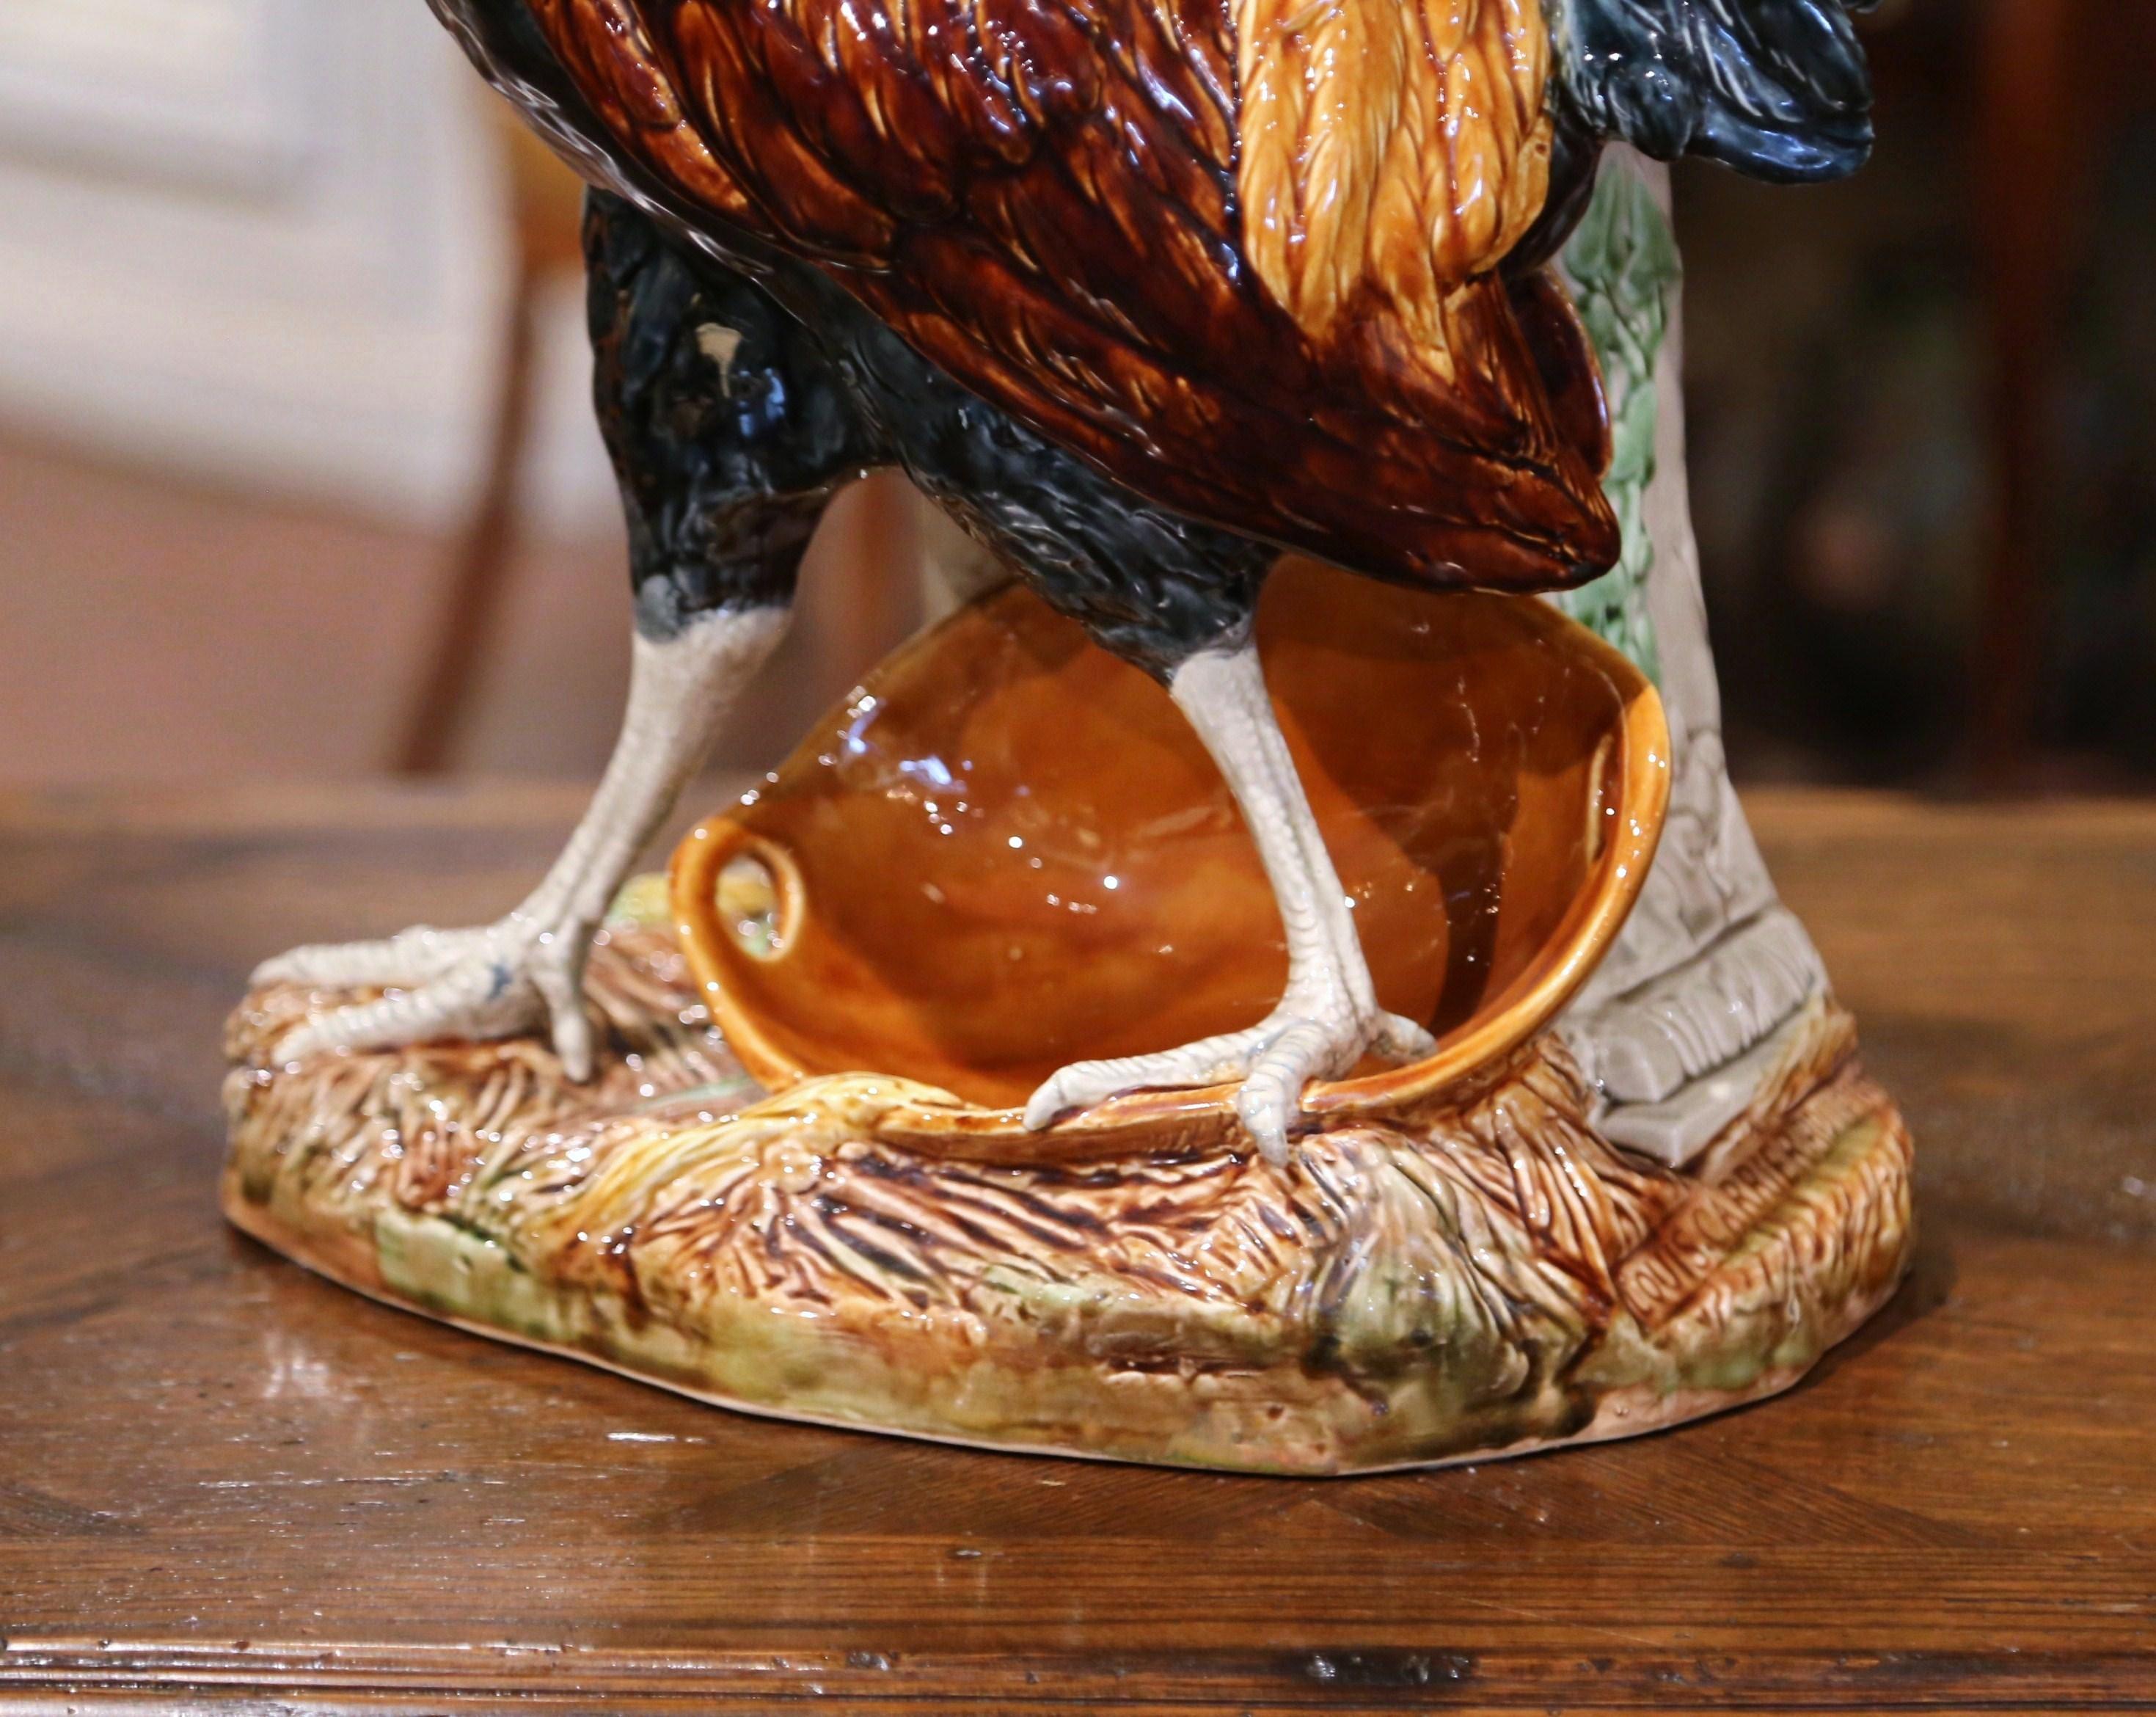 Majolica 19th Century French Painted Faience Rooster with Vase Signed Carrier-Belleuse